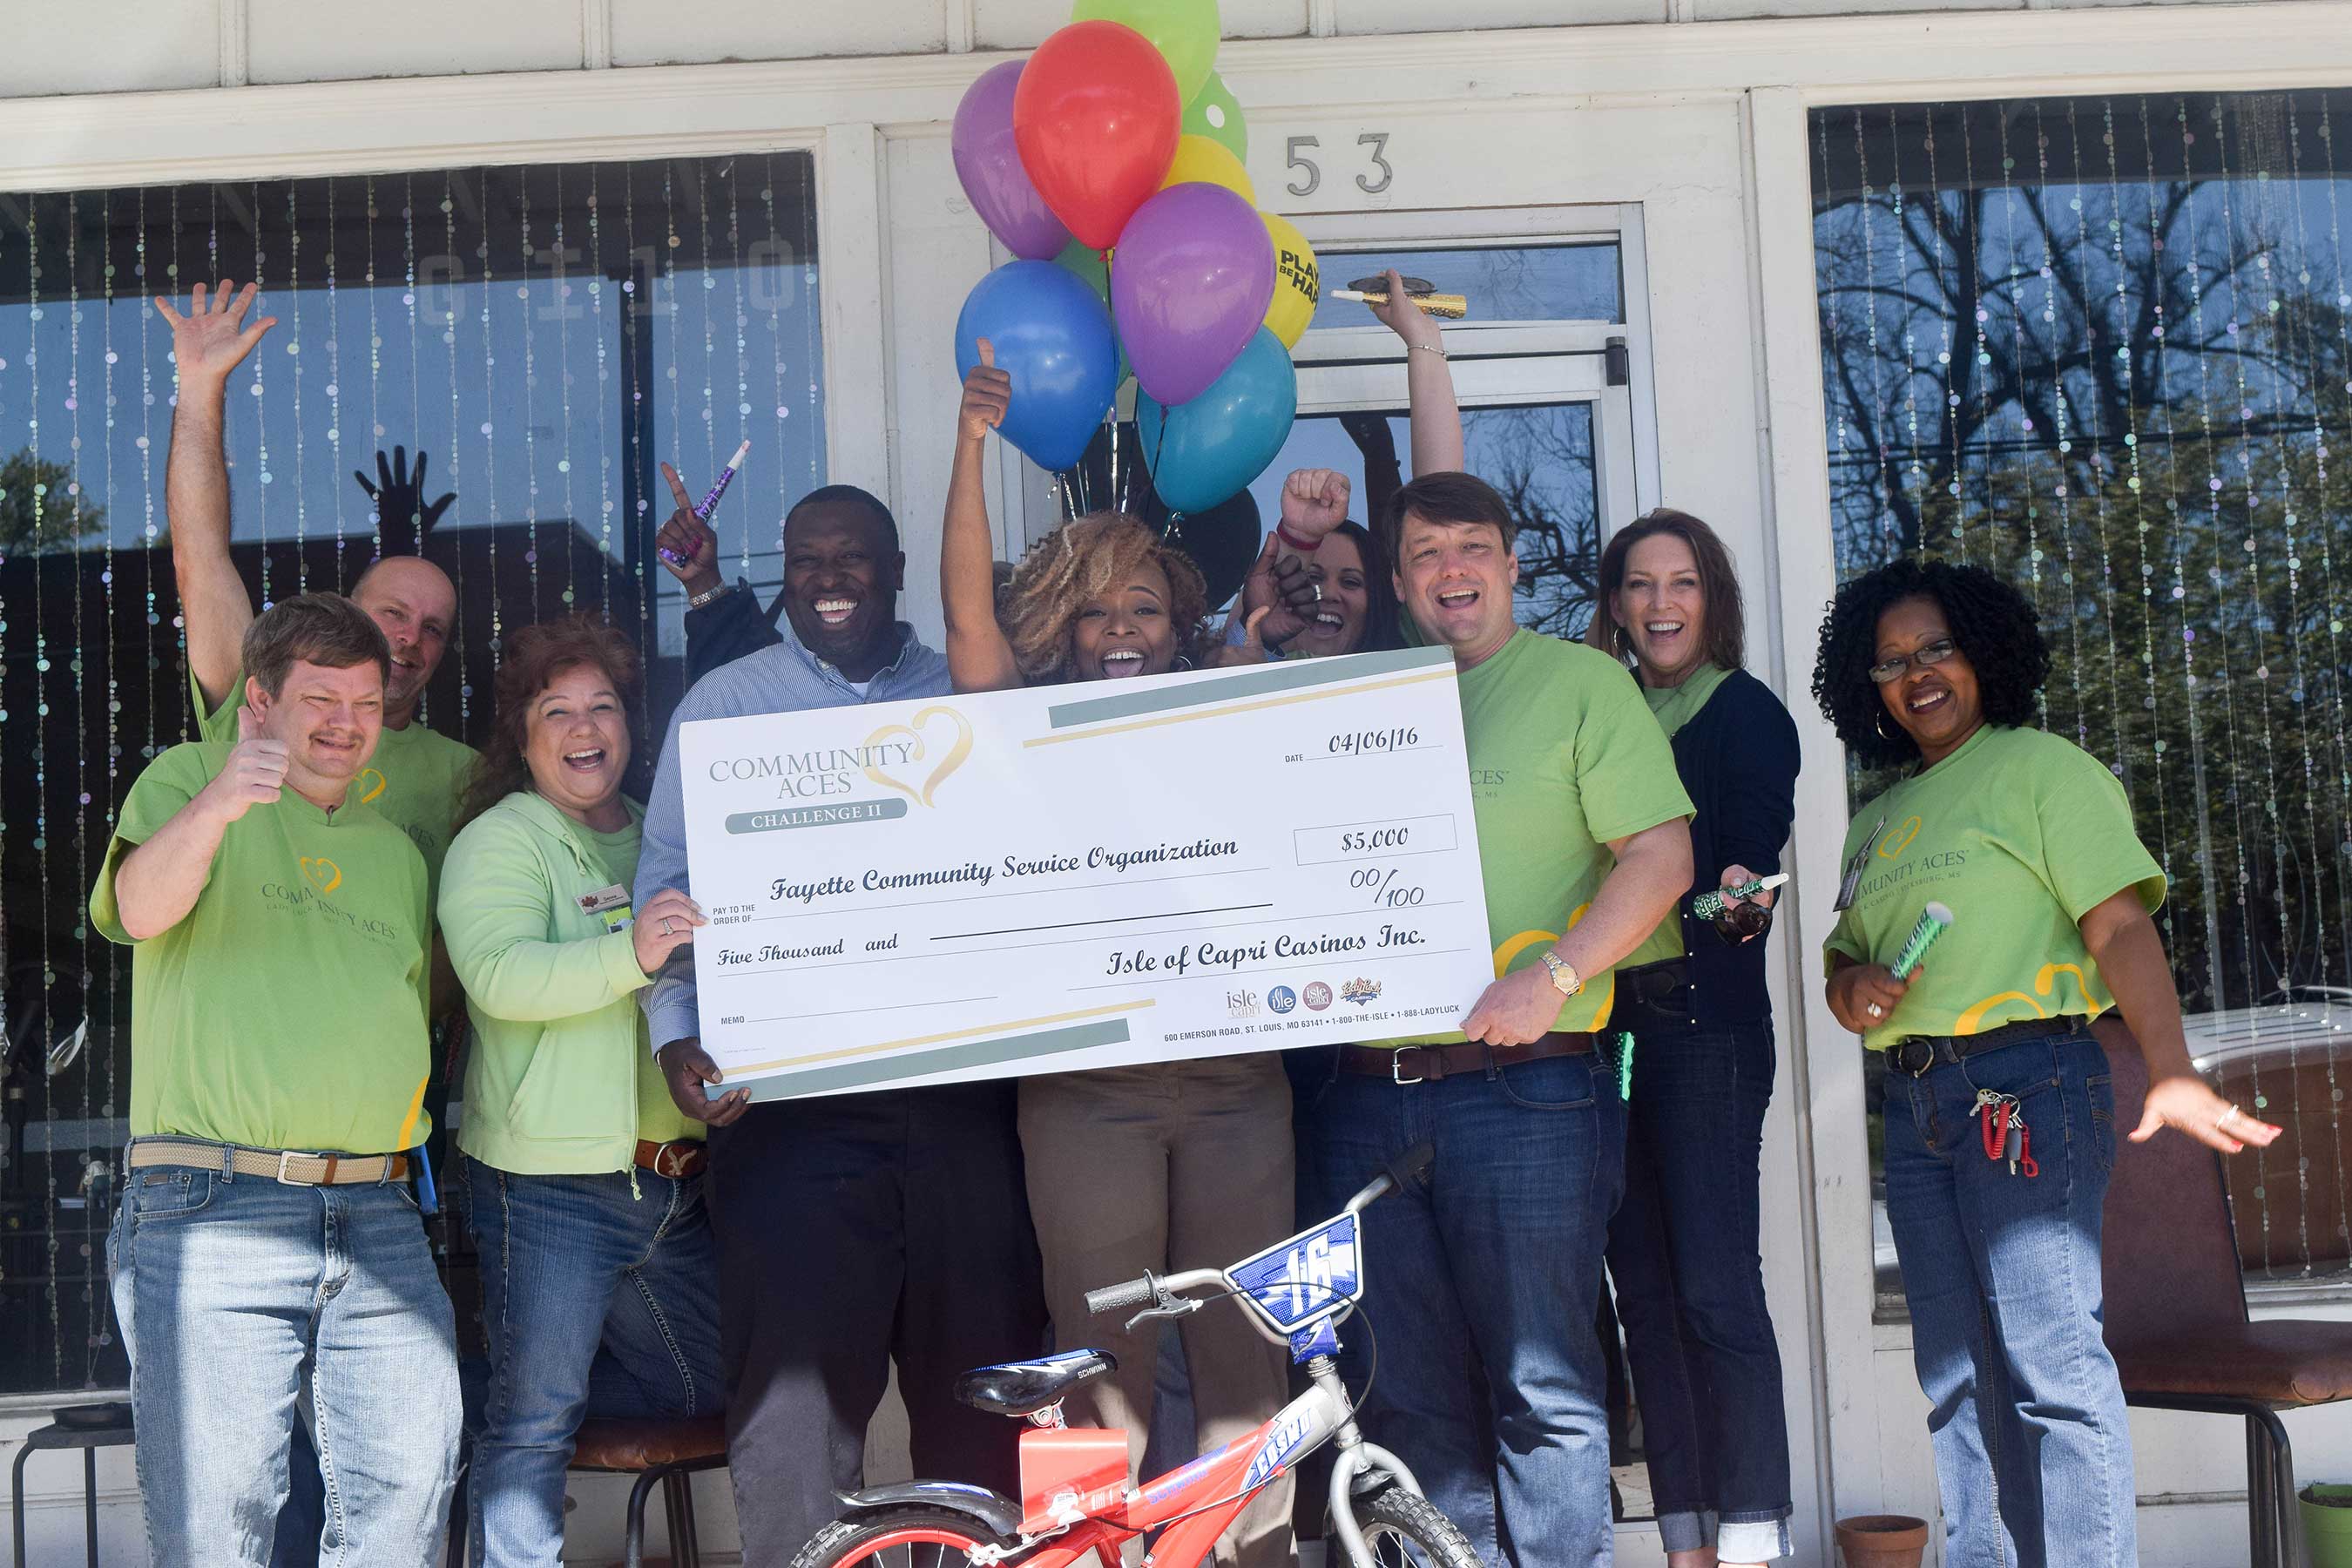 Fayette Community Service Organization, based in Fayette, Mississippi, was granted $5,000 toward the purchase of bicycles for its Get Fit program.